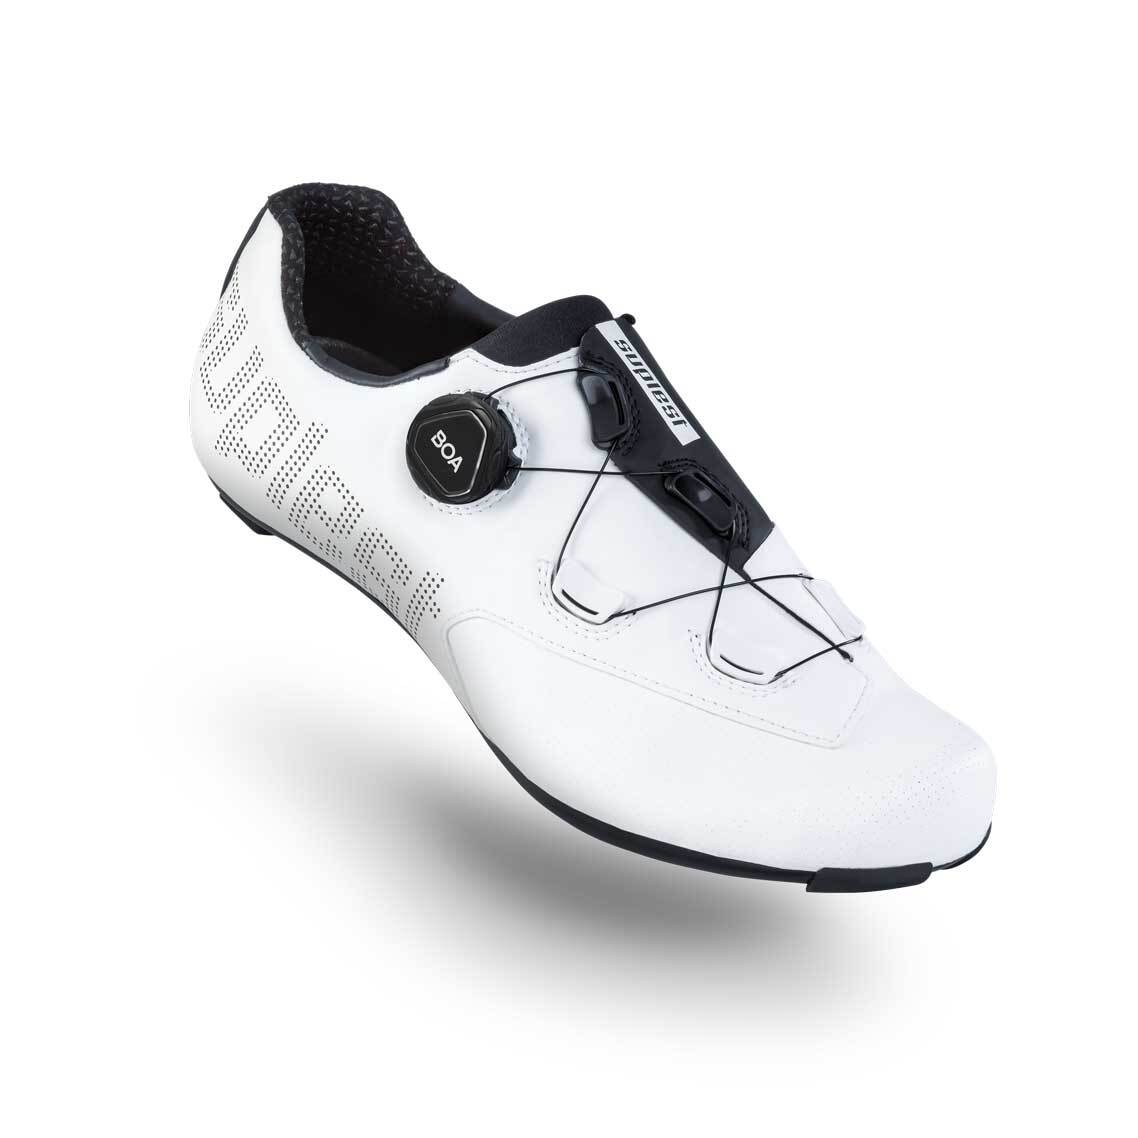 bicycle shoes